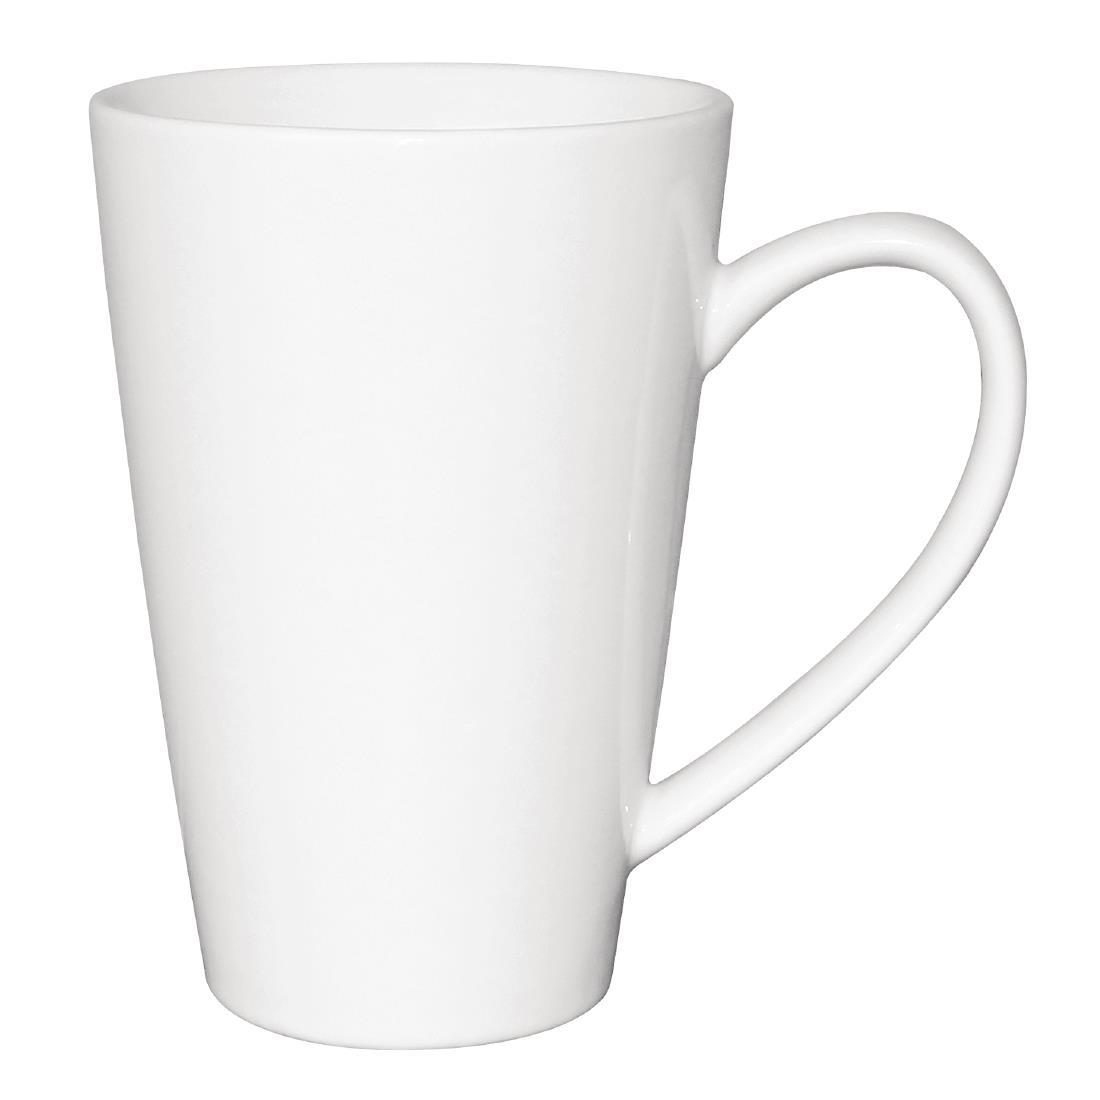 Olympia Cafe Latte Cups White 340ml (Pack of 12) - GL487  - 2